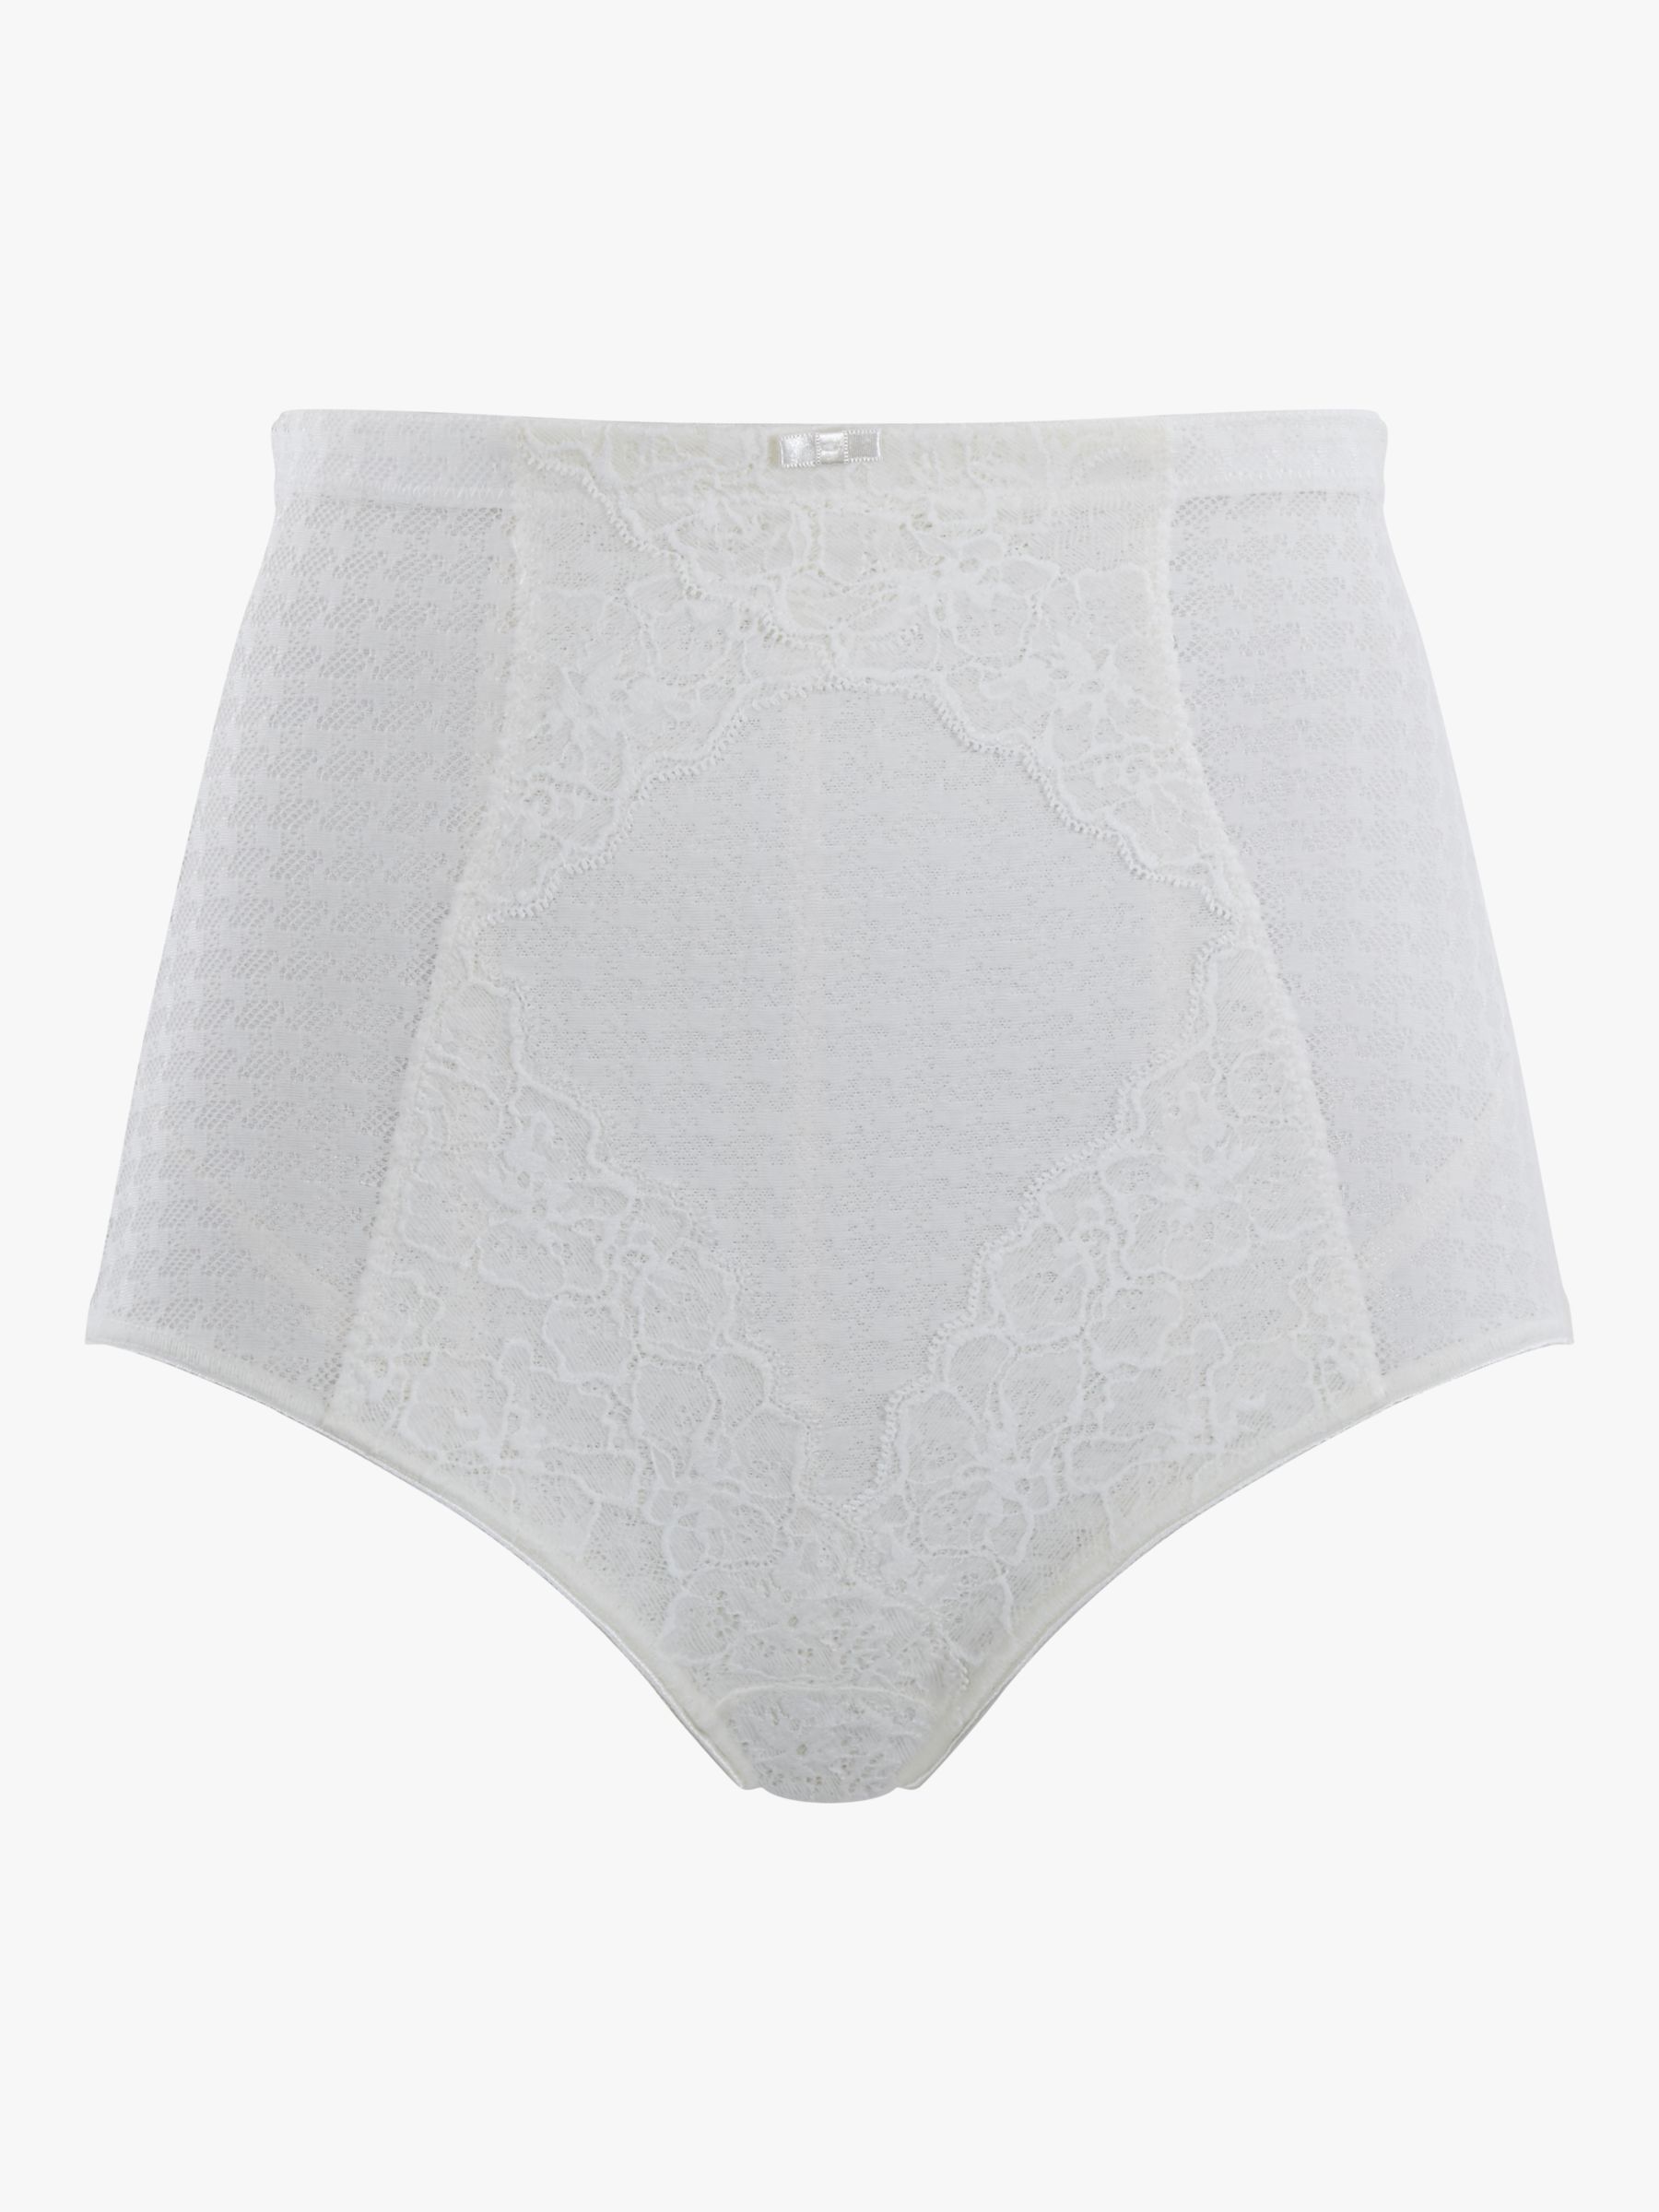 Panache Allure Brief, Ivory at John Lewis & Partners